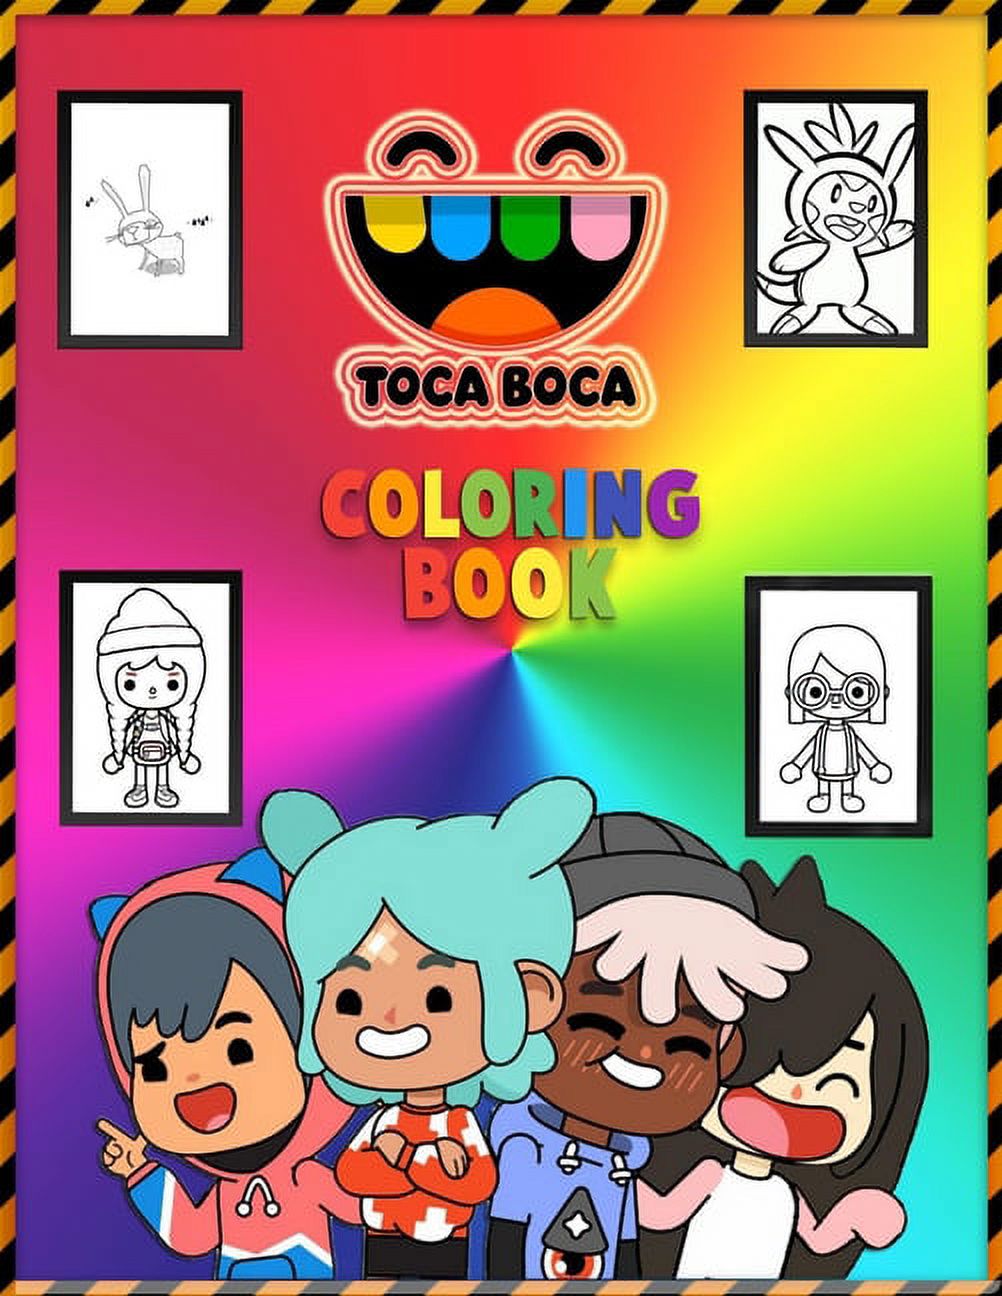 Toca Boca Coloring Book : Meaningful Gift For Kids Toca Boca and Toca Life Pets Colorin Book, High Quality Pages, 8.5"x11" size (Paperback) - image 1 of 1